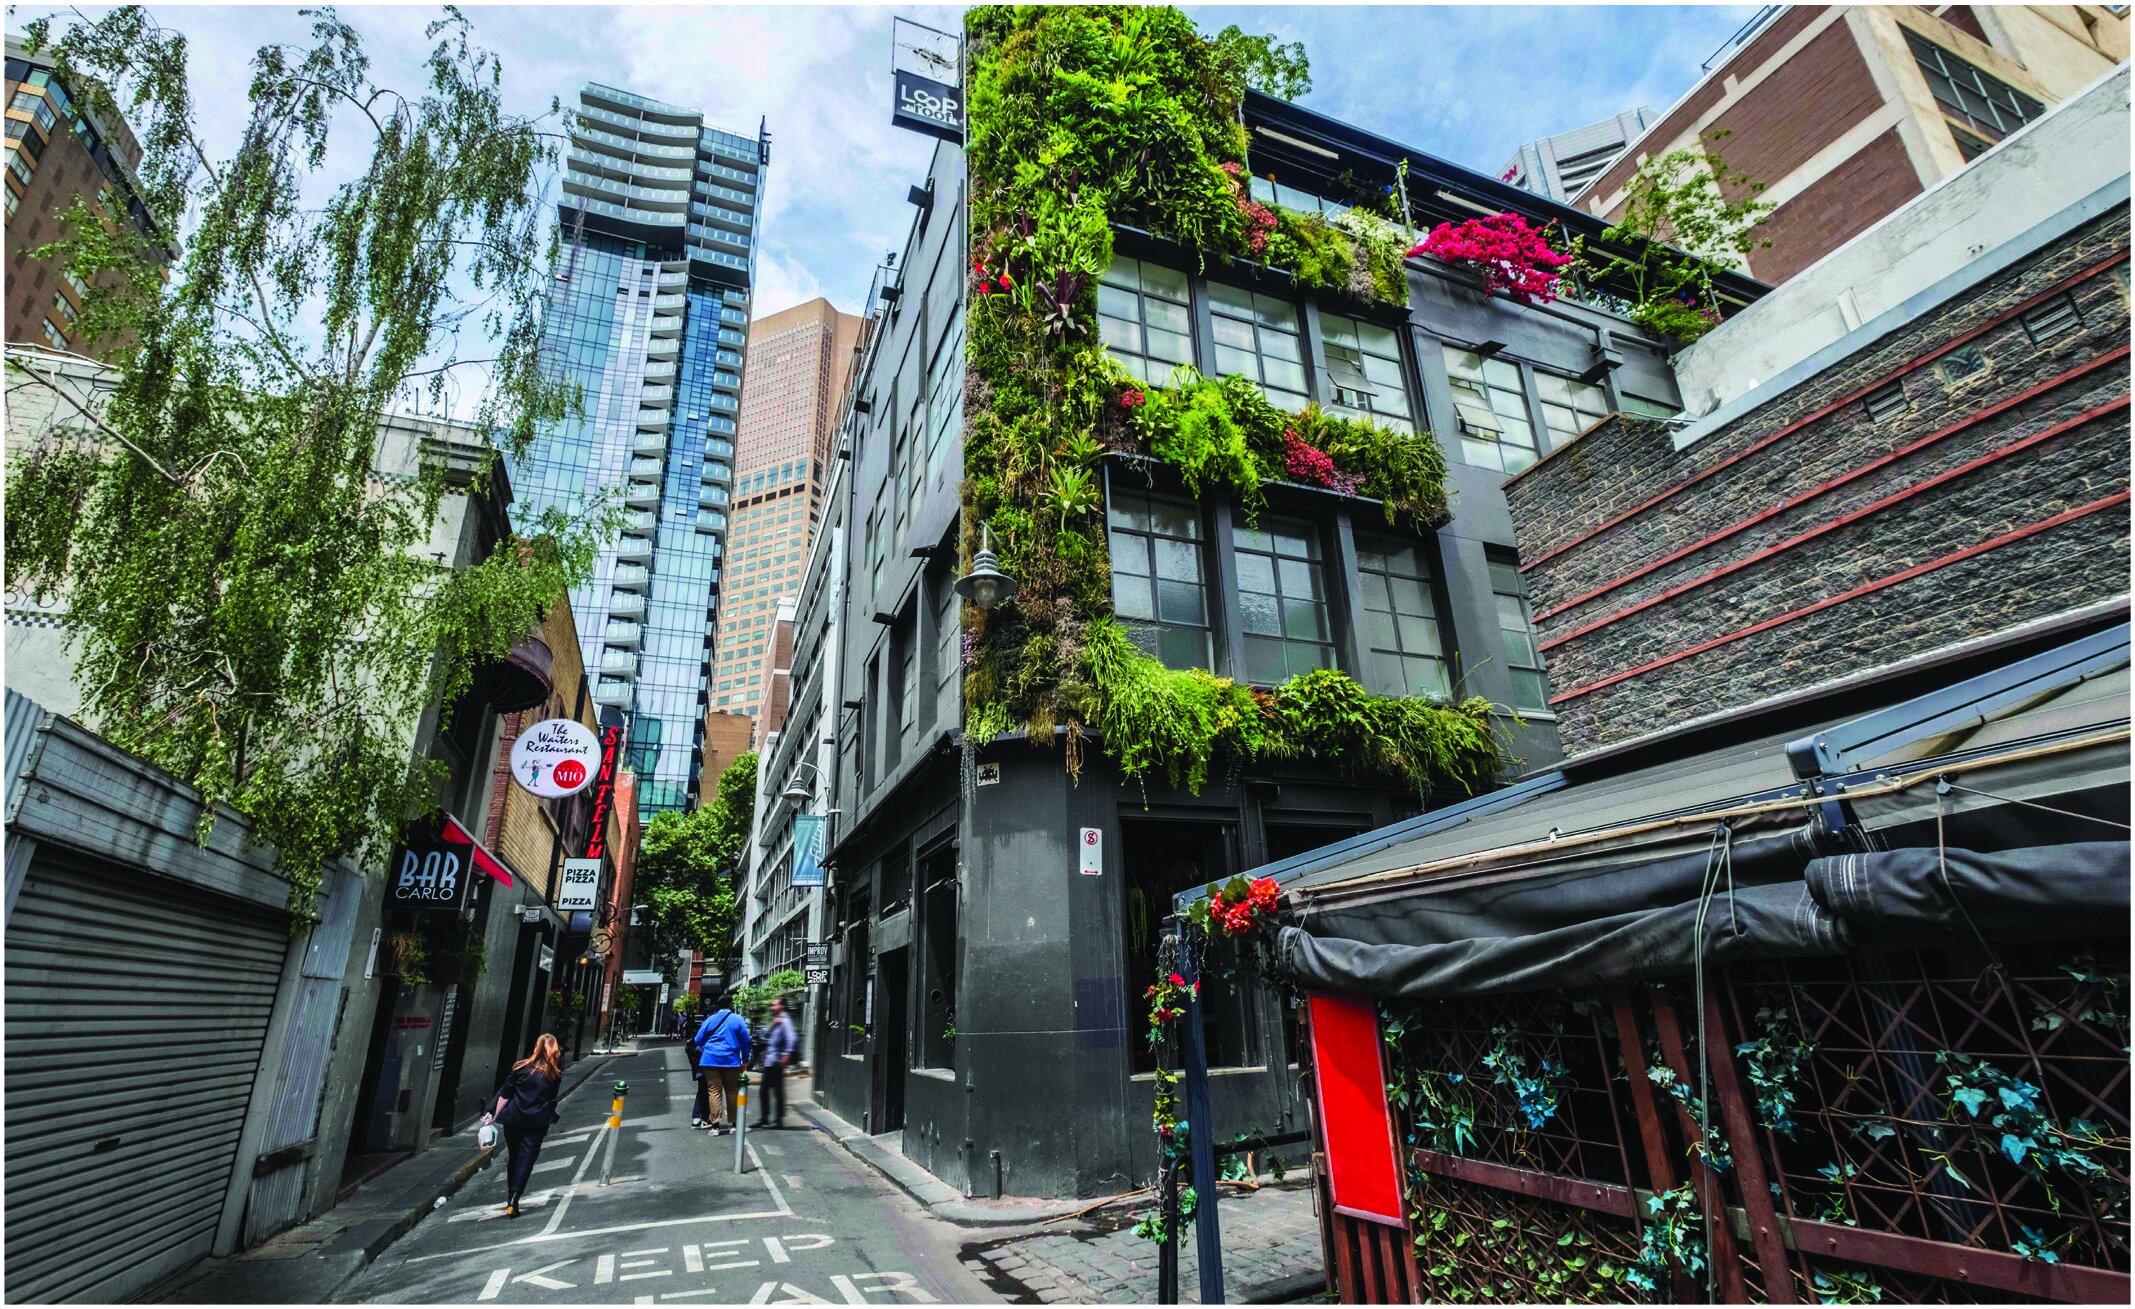  Modular living wall gardens can be mounted directly on building walls or on a separate grid structure, and include soil and an irrigation system.  &nbsp;Location: Meyers Place, Melbourne, Australia  Image credit: City of Melbourne 